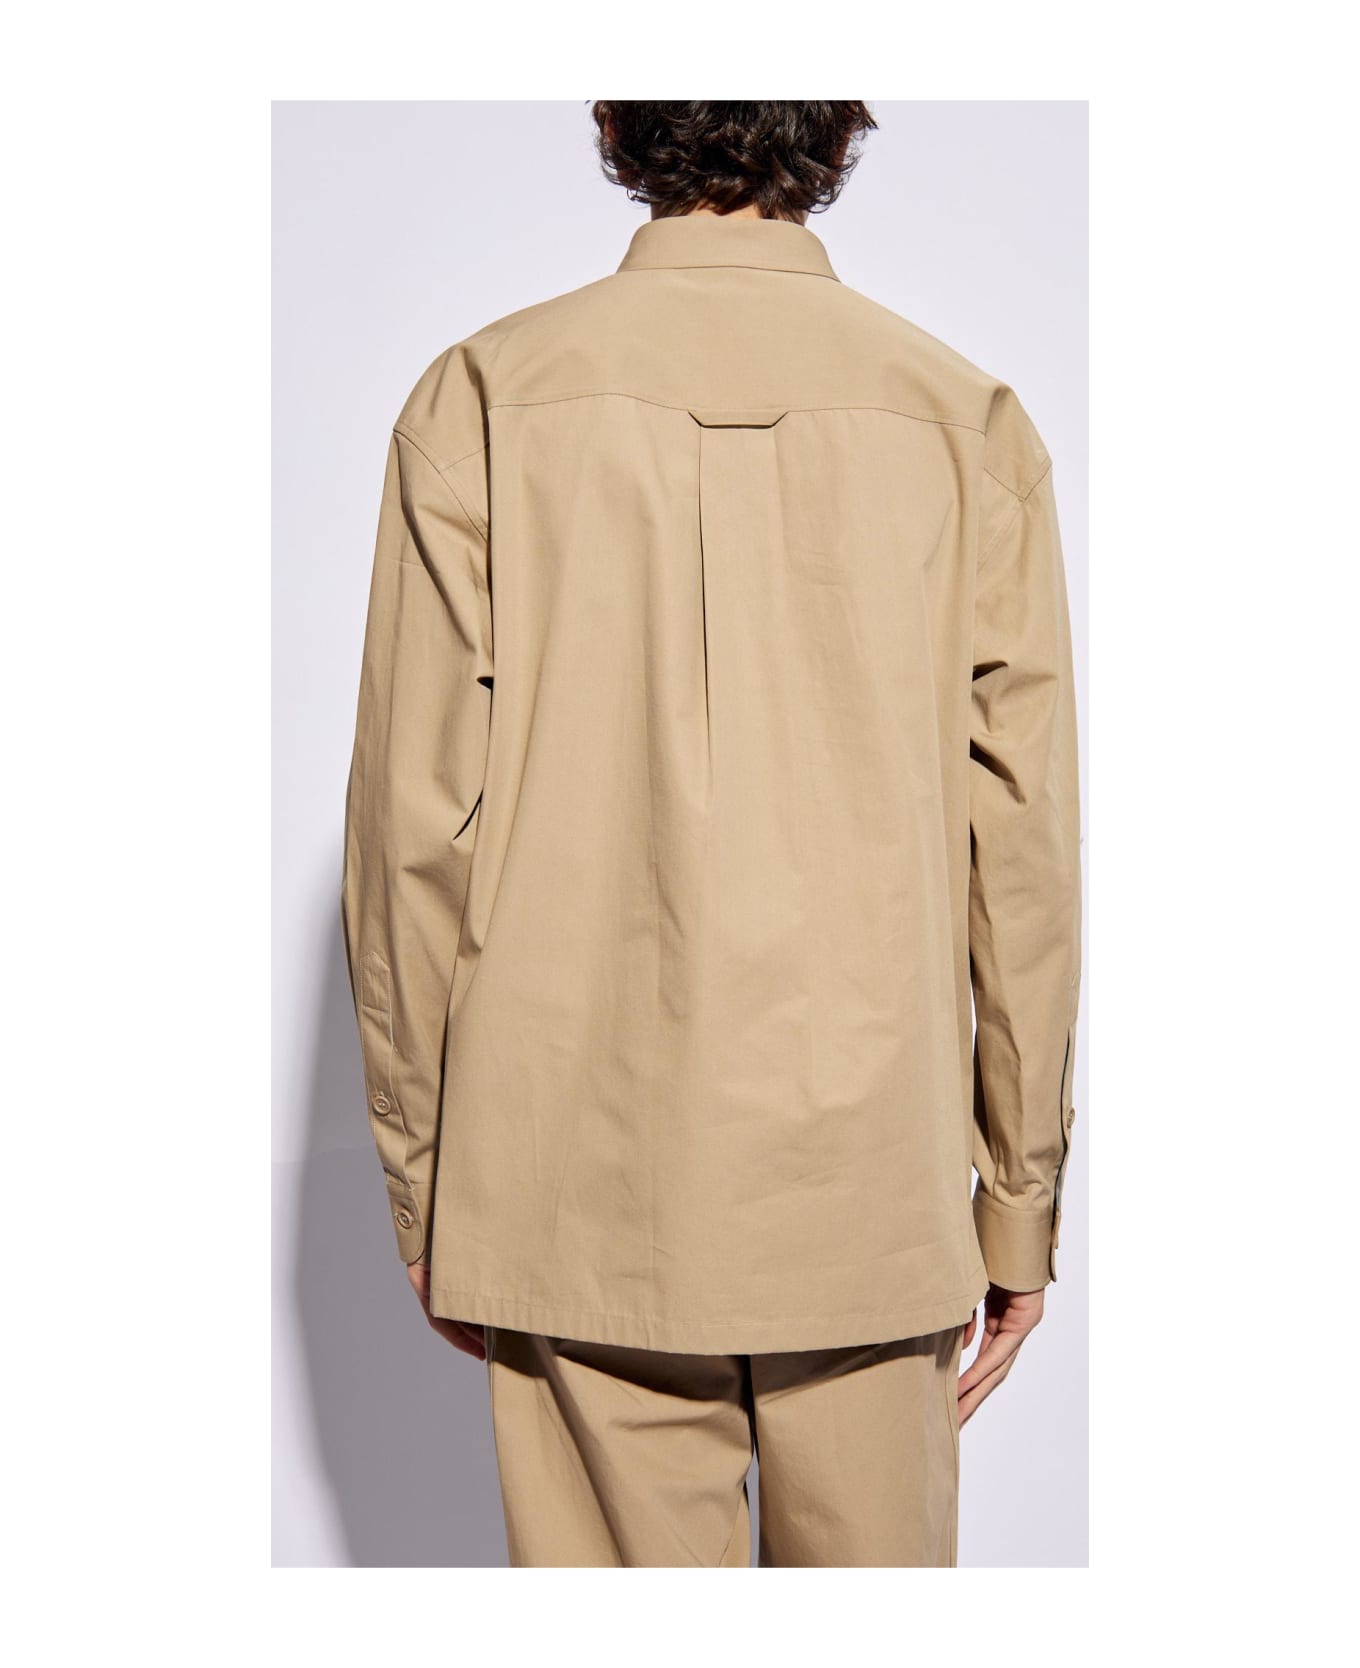 Gucci Cotton Shirt With Pocket - Beige